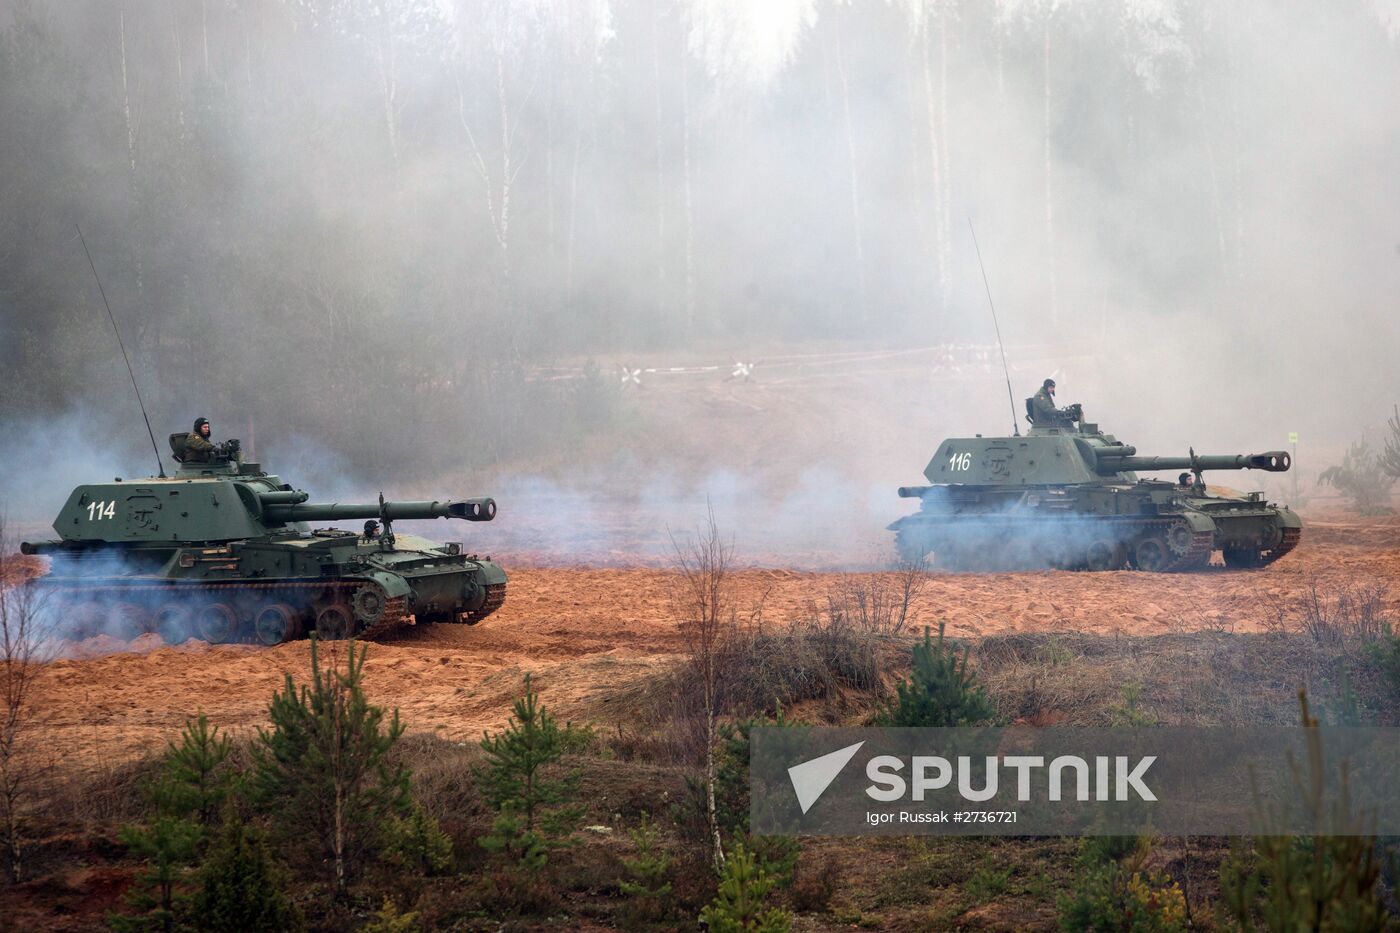 Artillery and missile live fire exercises in Leningrad Region